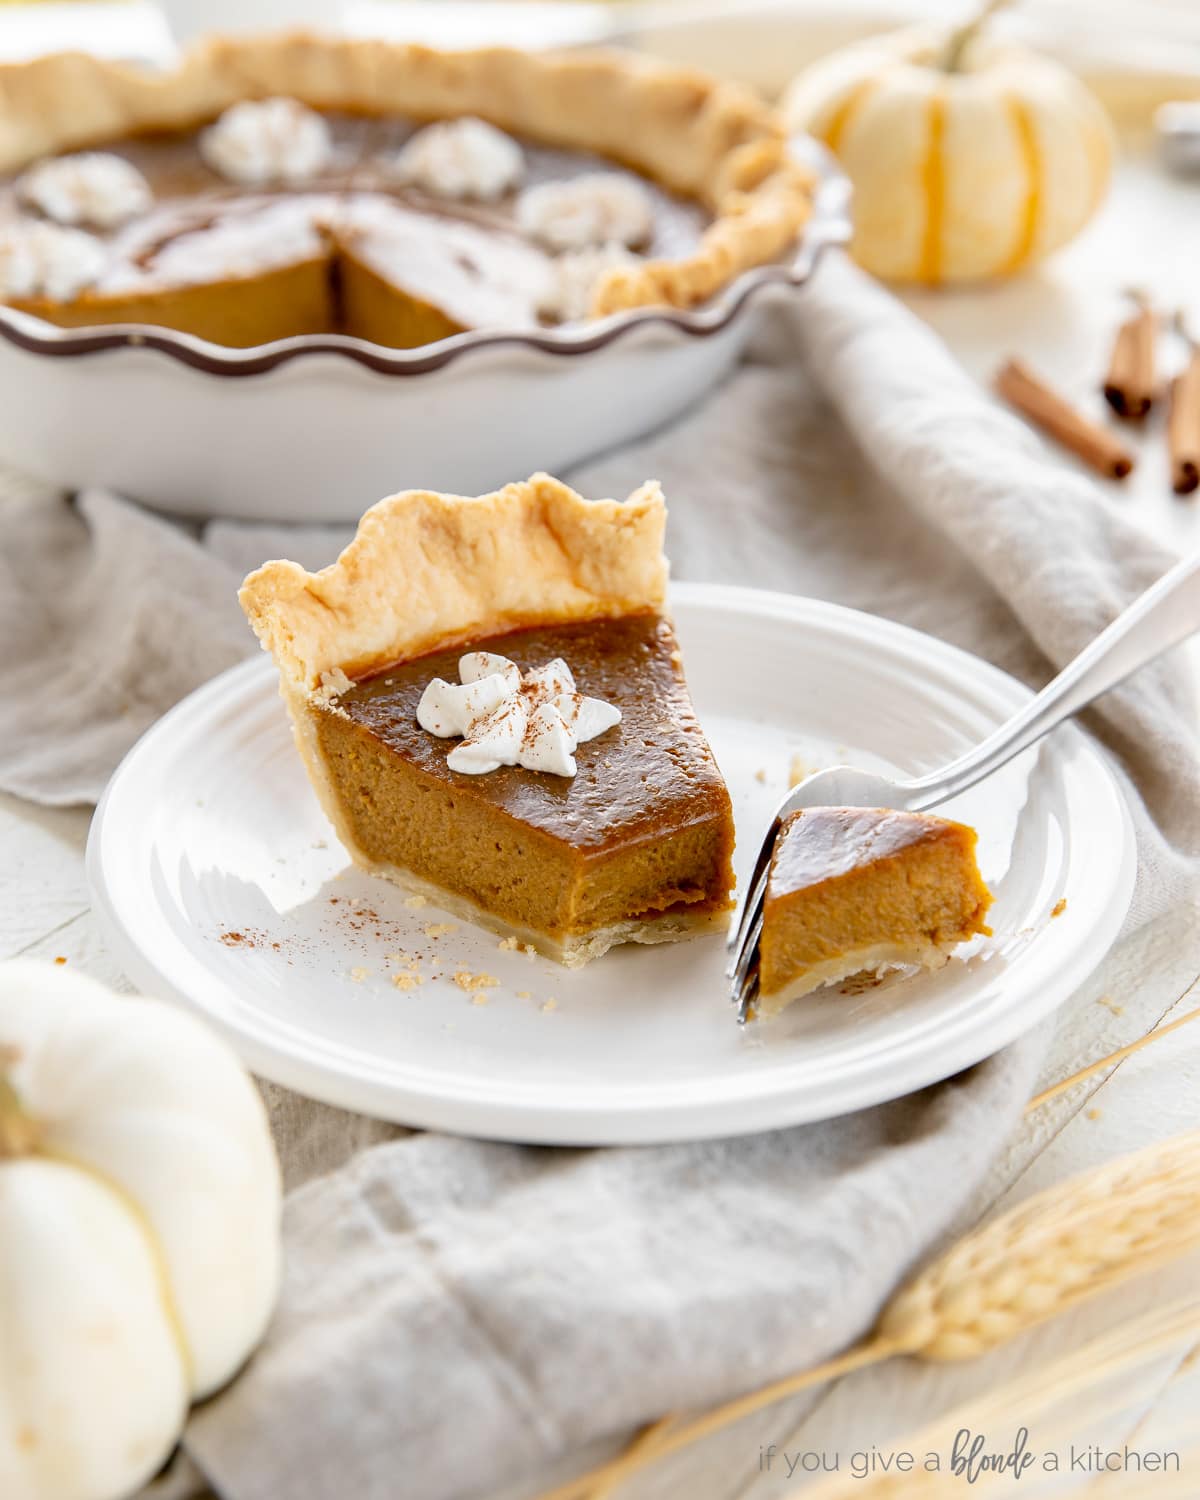 slice of pumpkin pie on plate with fork taking a bite.